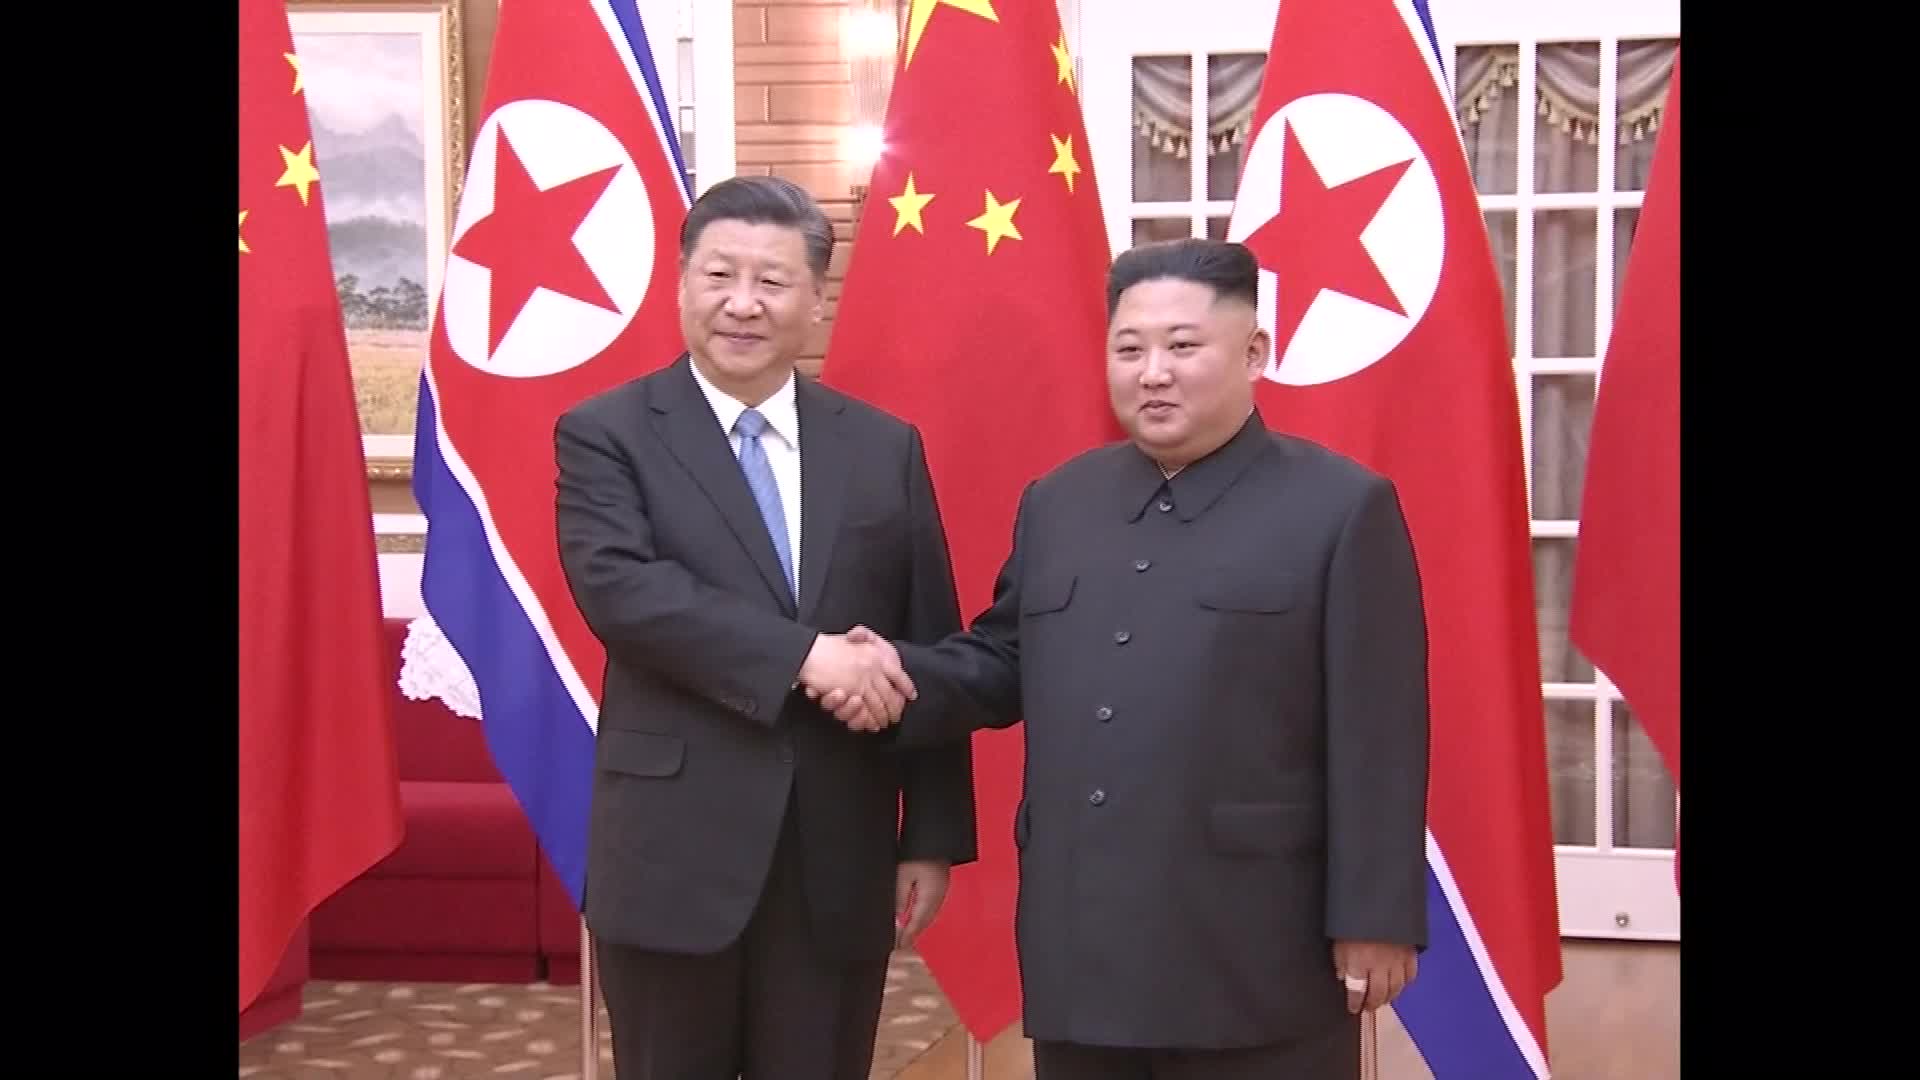 Kim Jong Un tells Xi Jinping in letter he hopes to promote